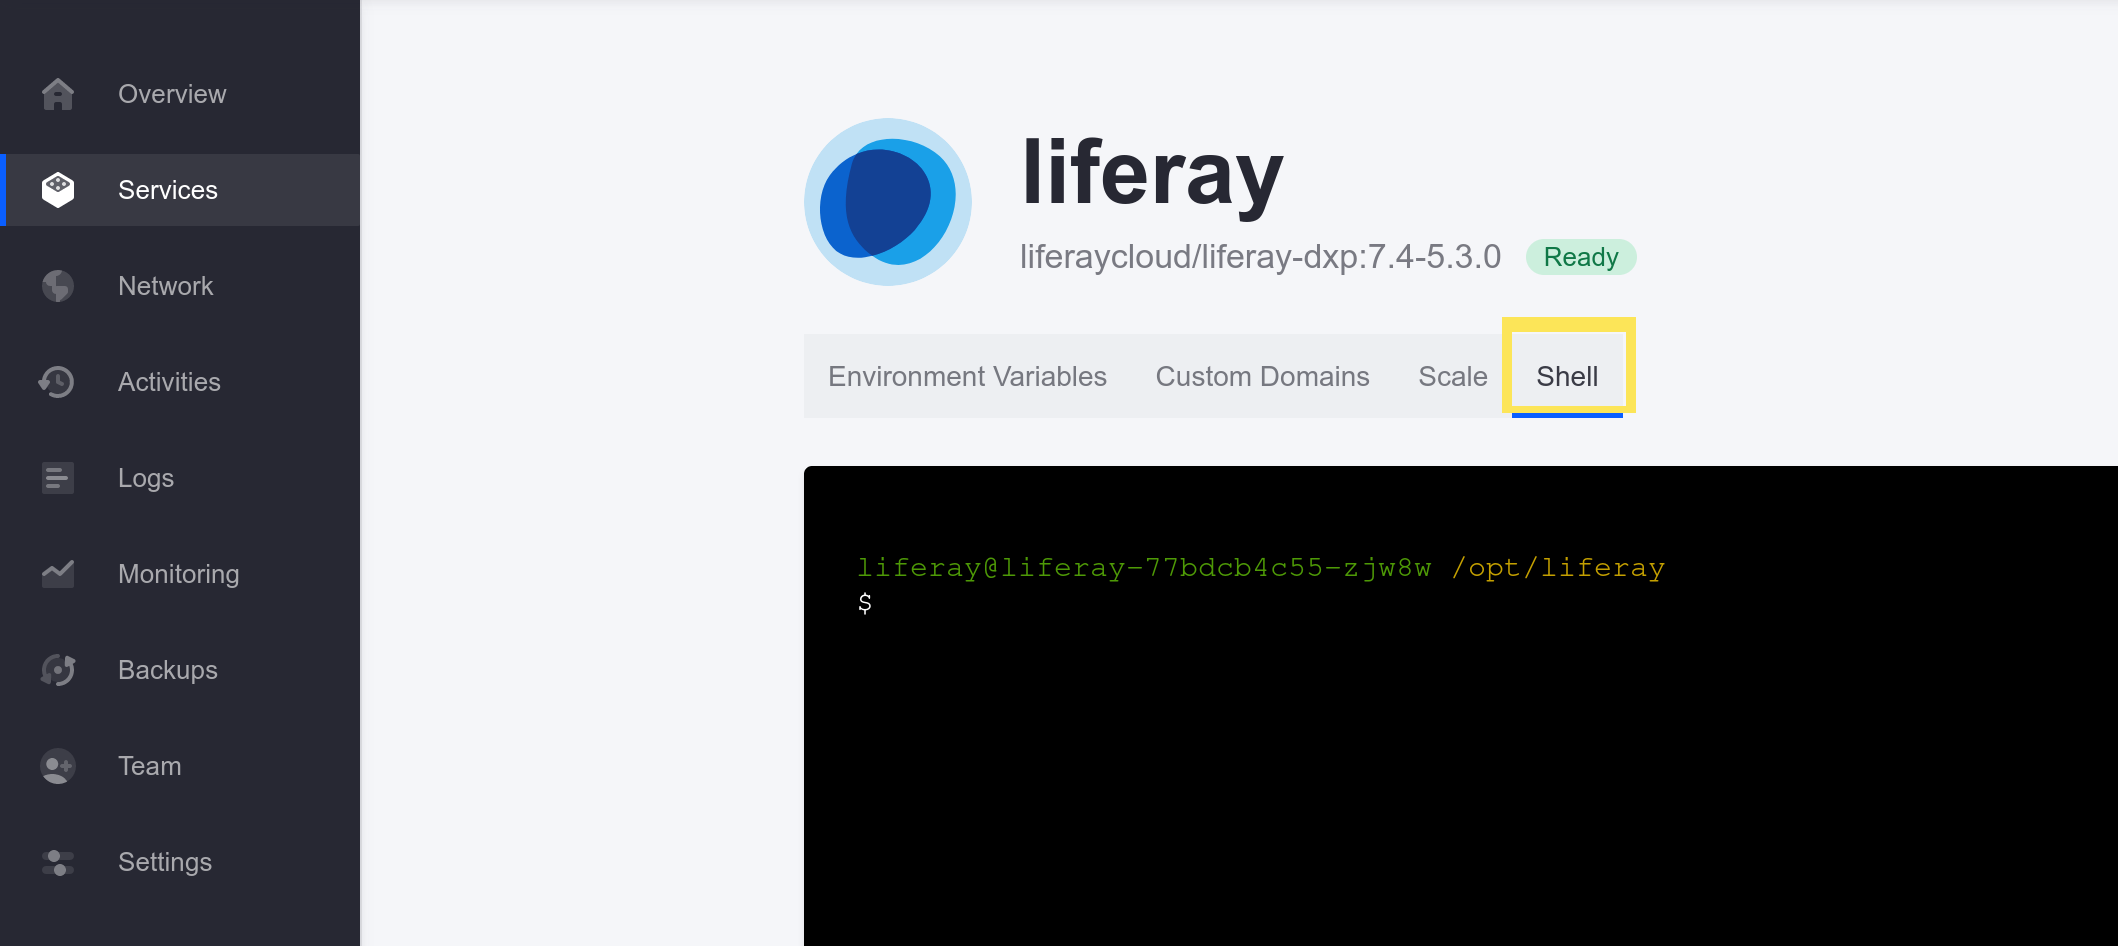 Use the liferay service's shell to check the VPN connection.